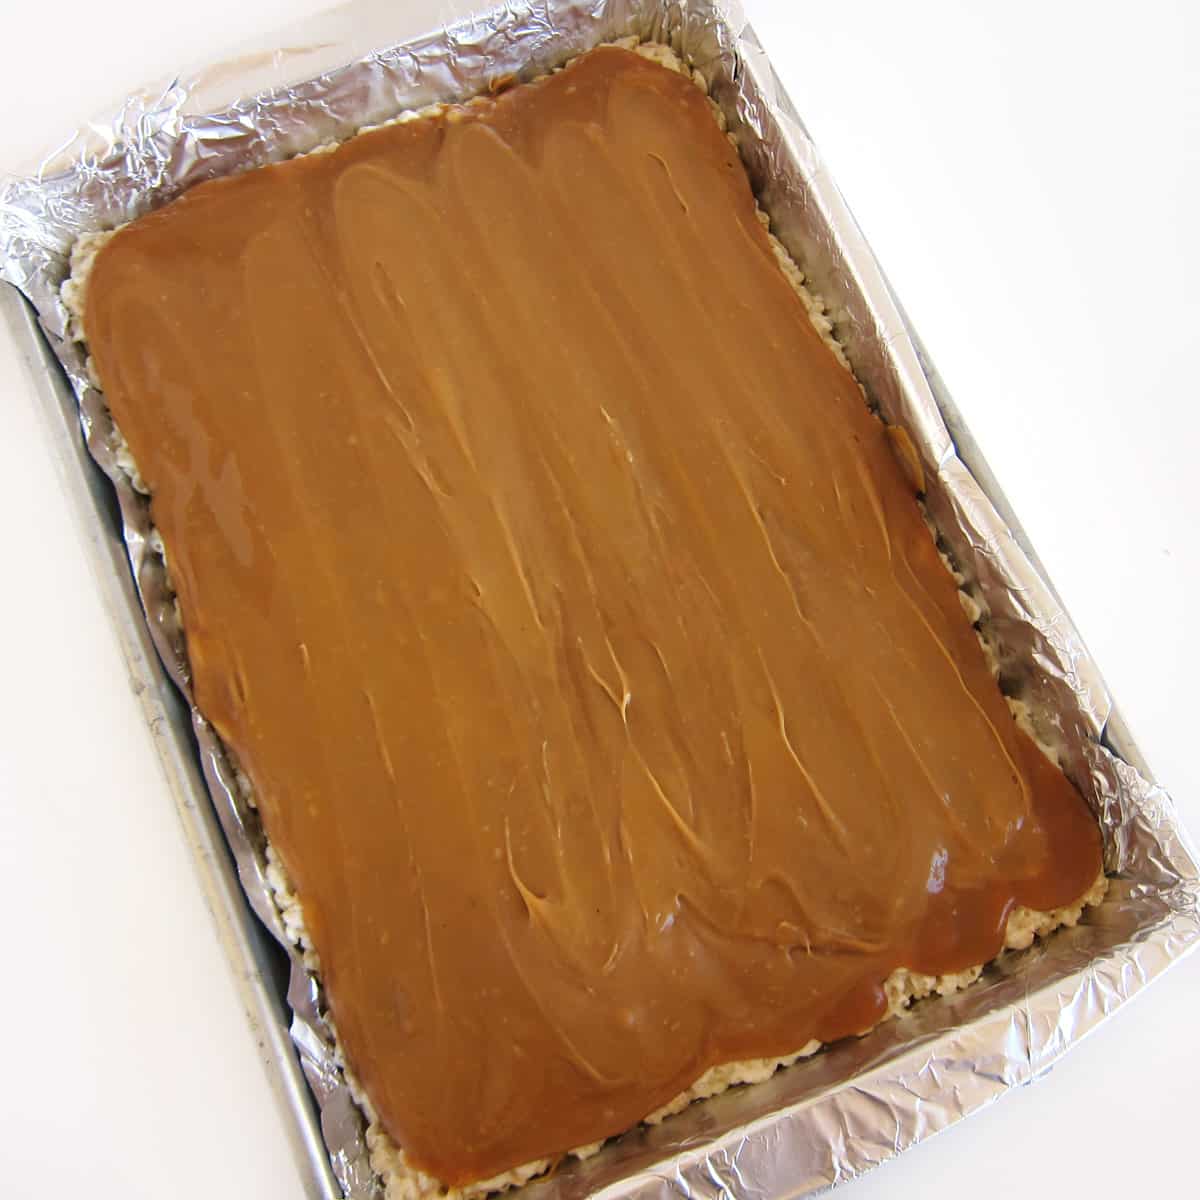 caramel spread in a layer over rice krispie treats